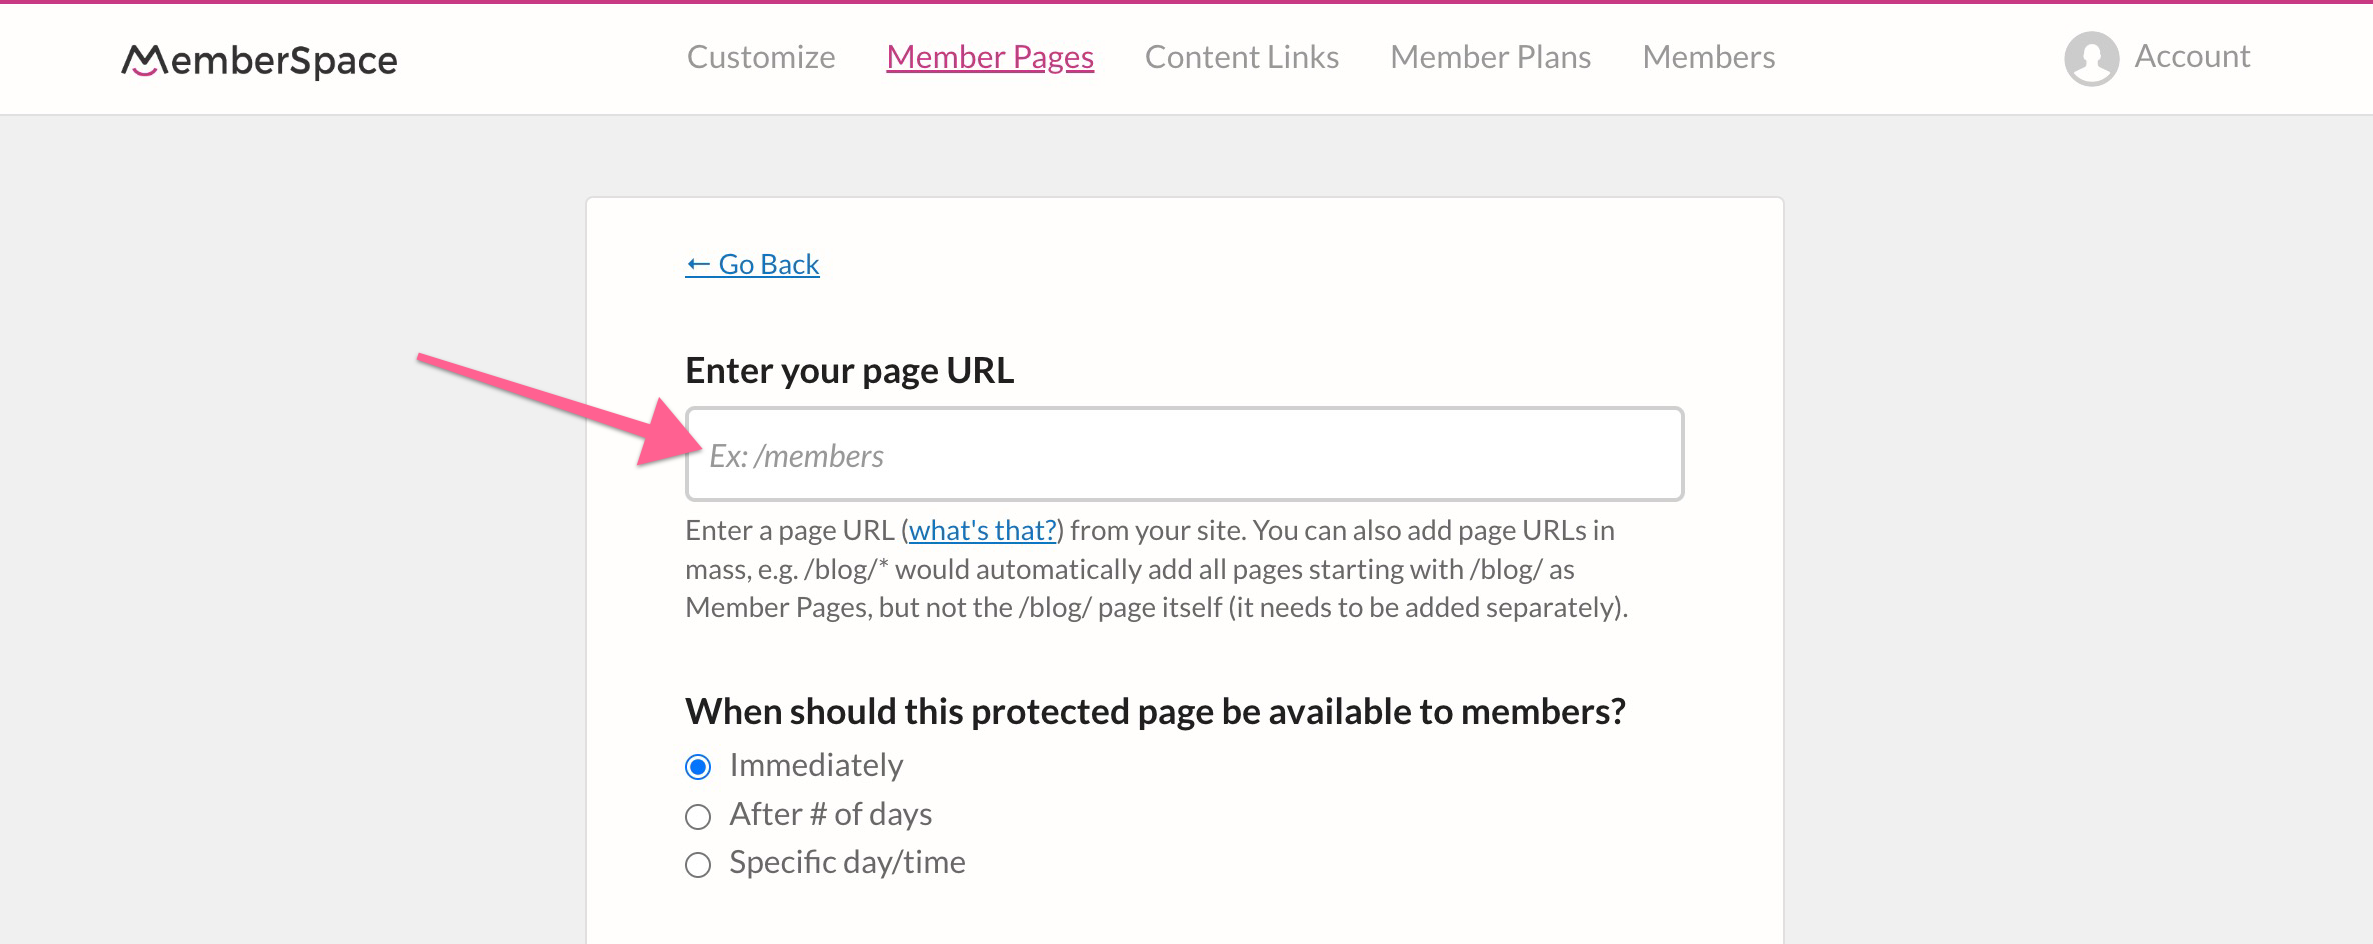 Add in-person event confirmation pages to MemberSpace and protect them